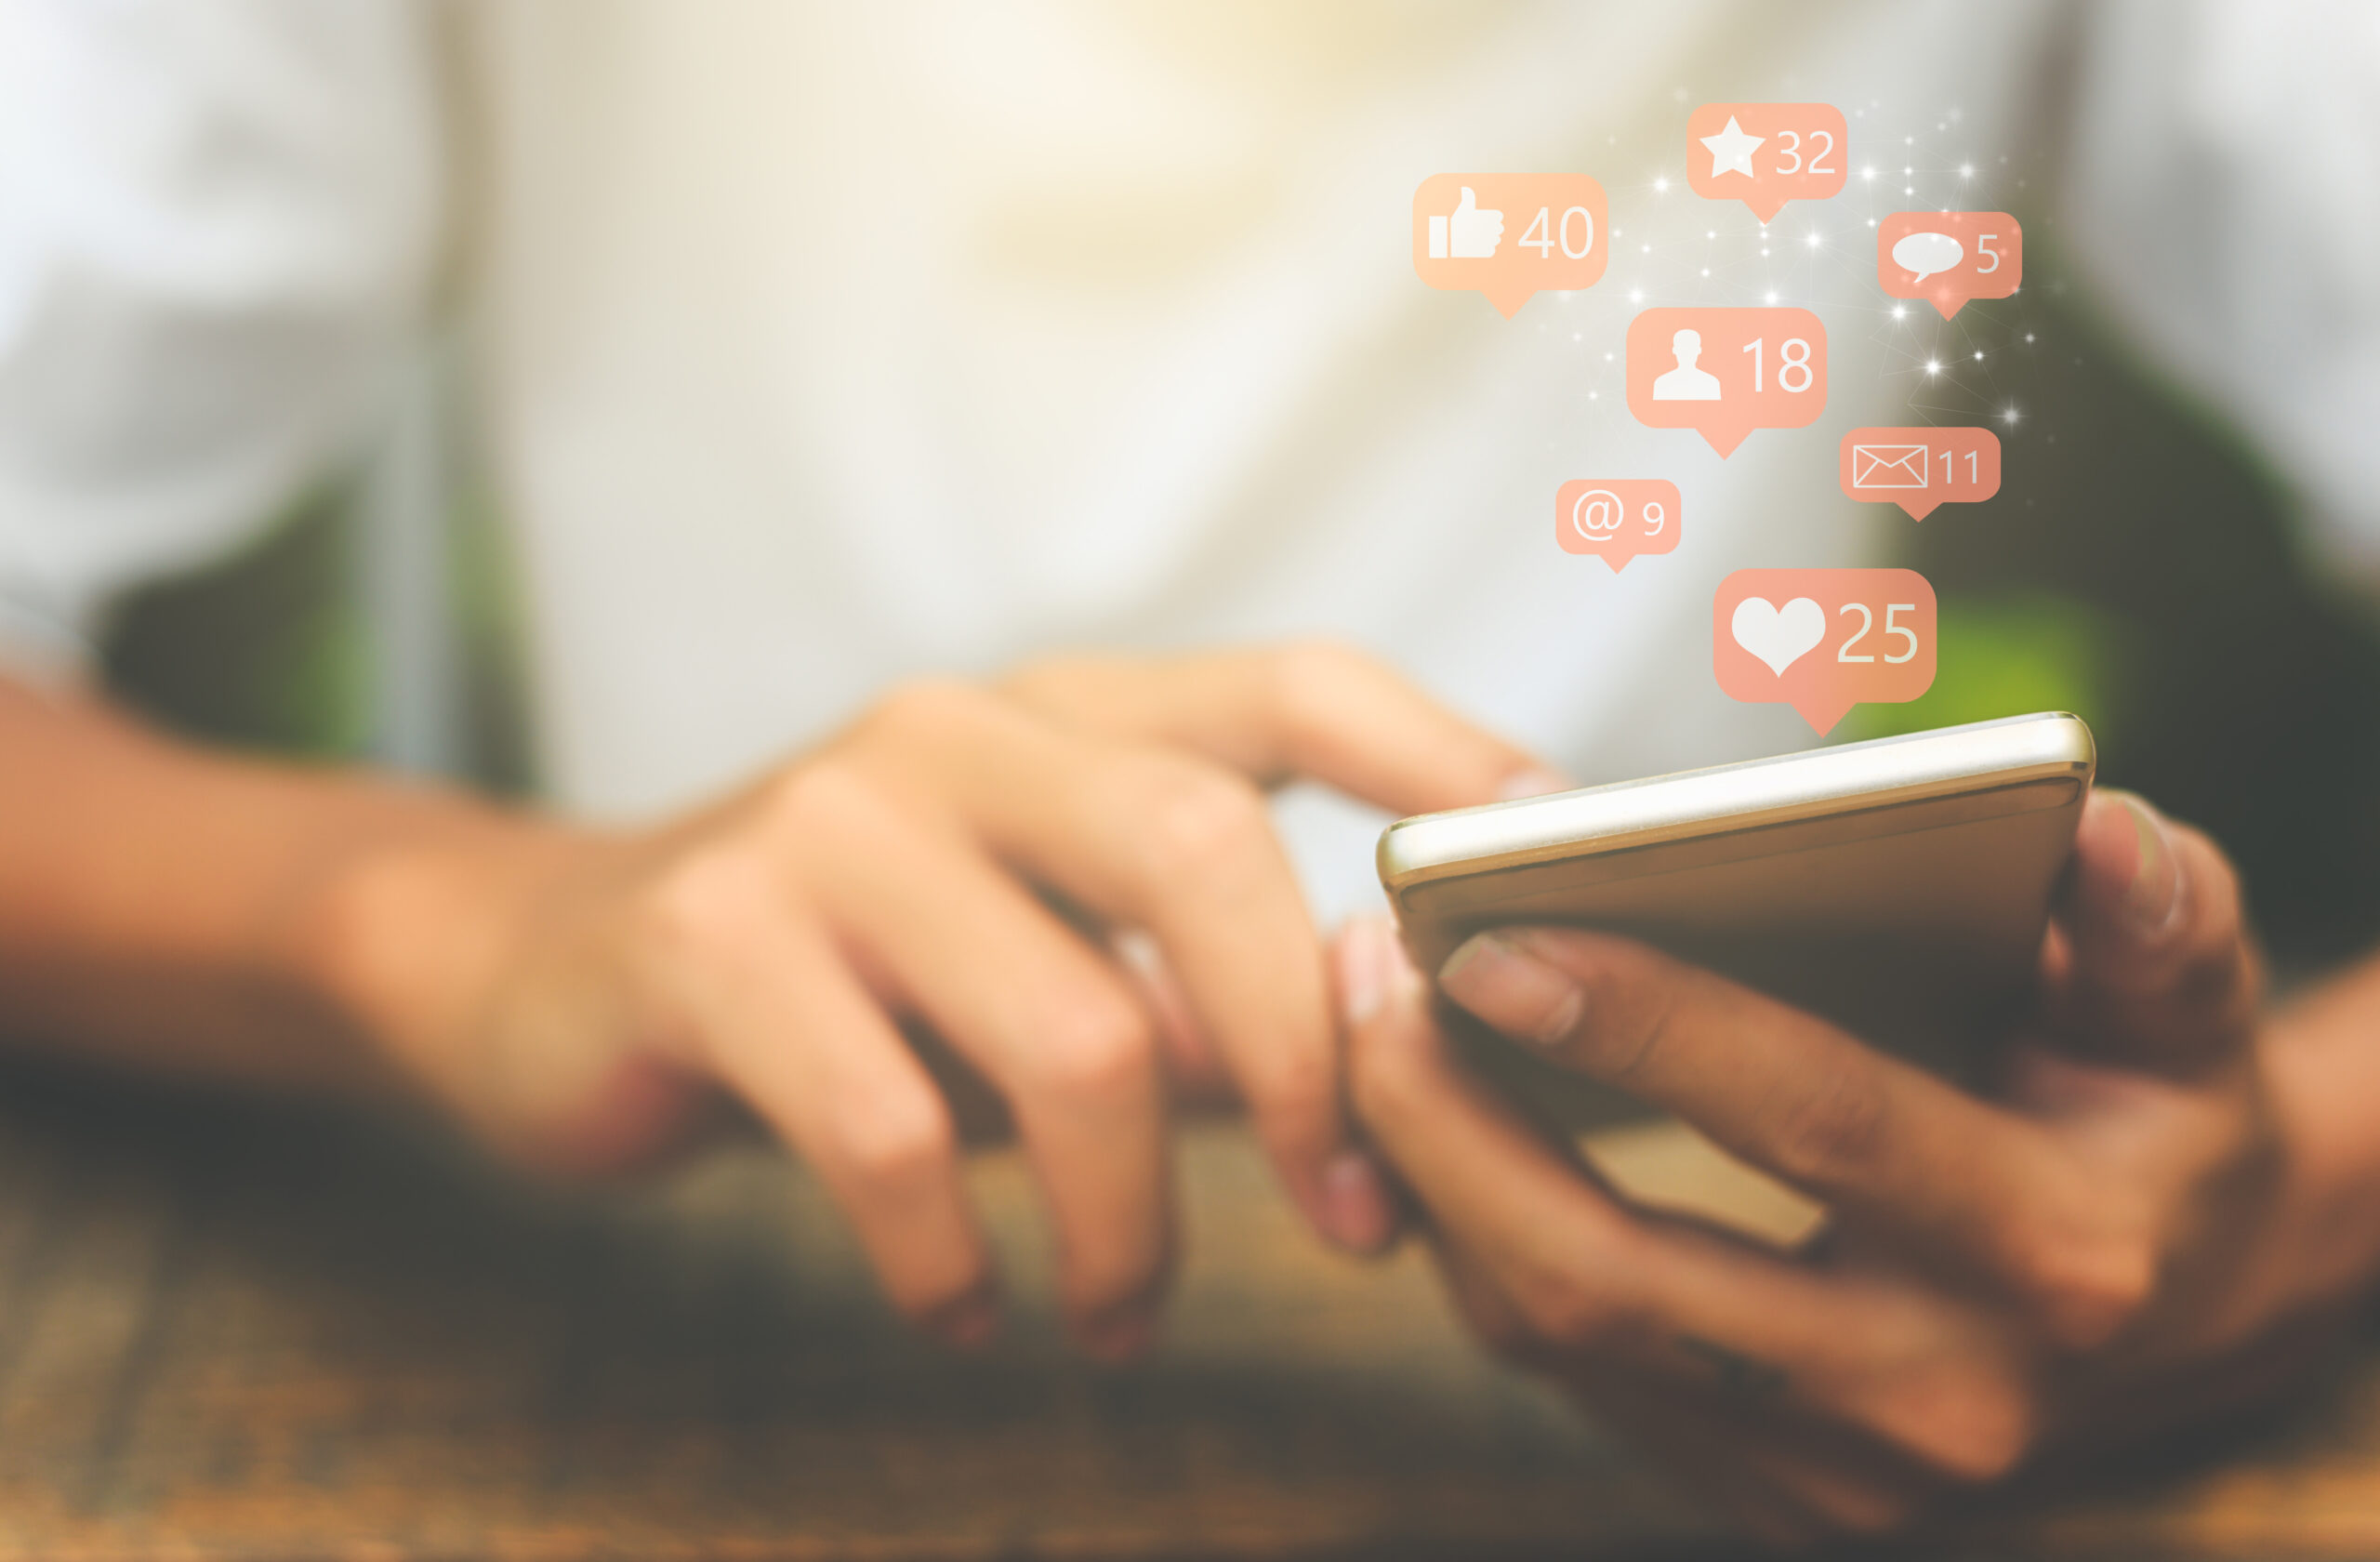 The 4 “untraditional” social media channels you should be using for patient recruitment 